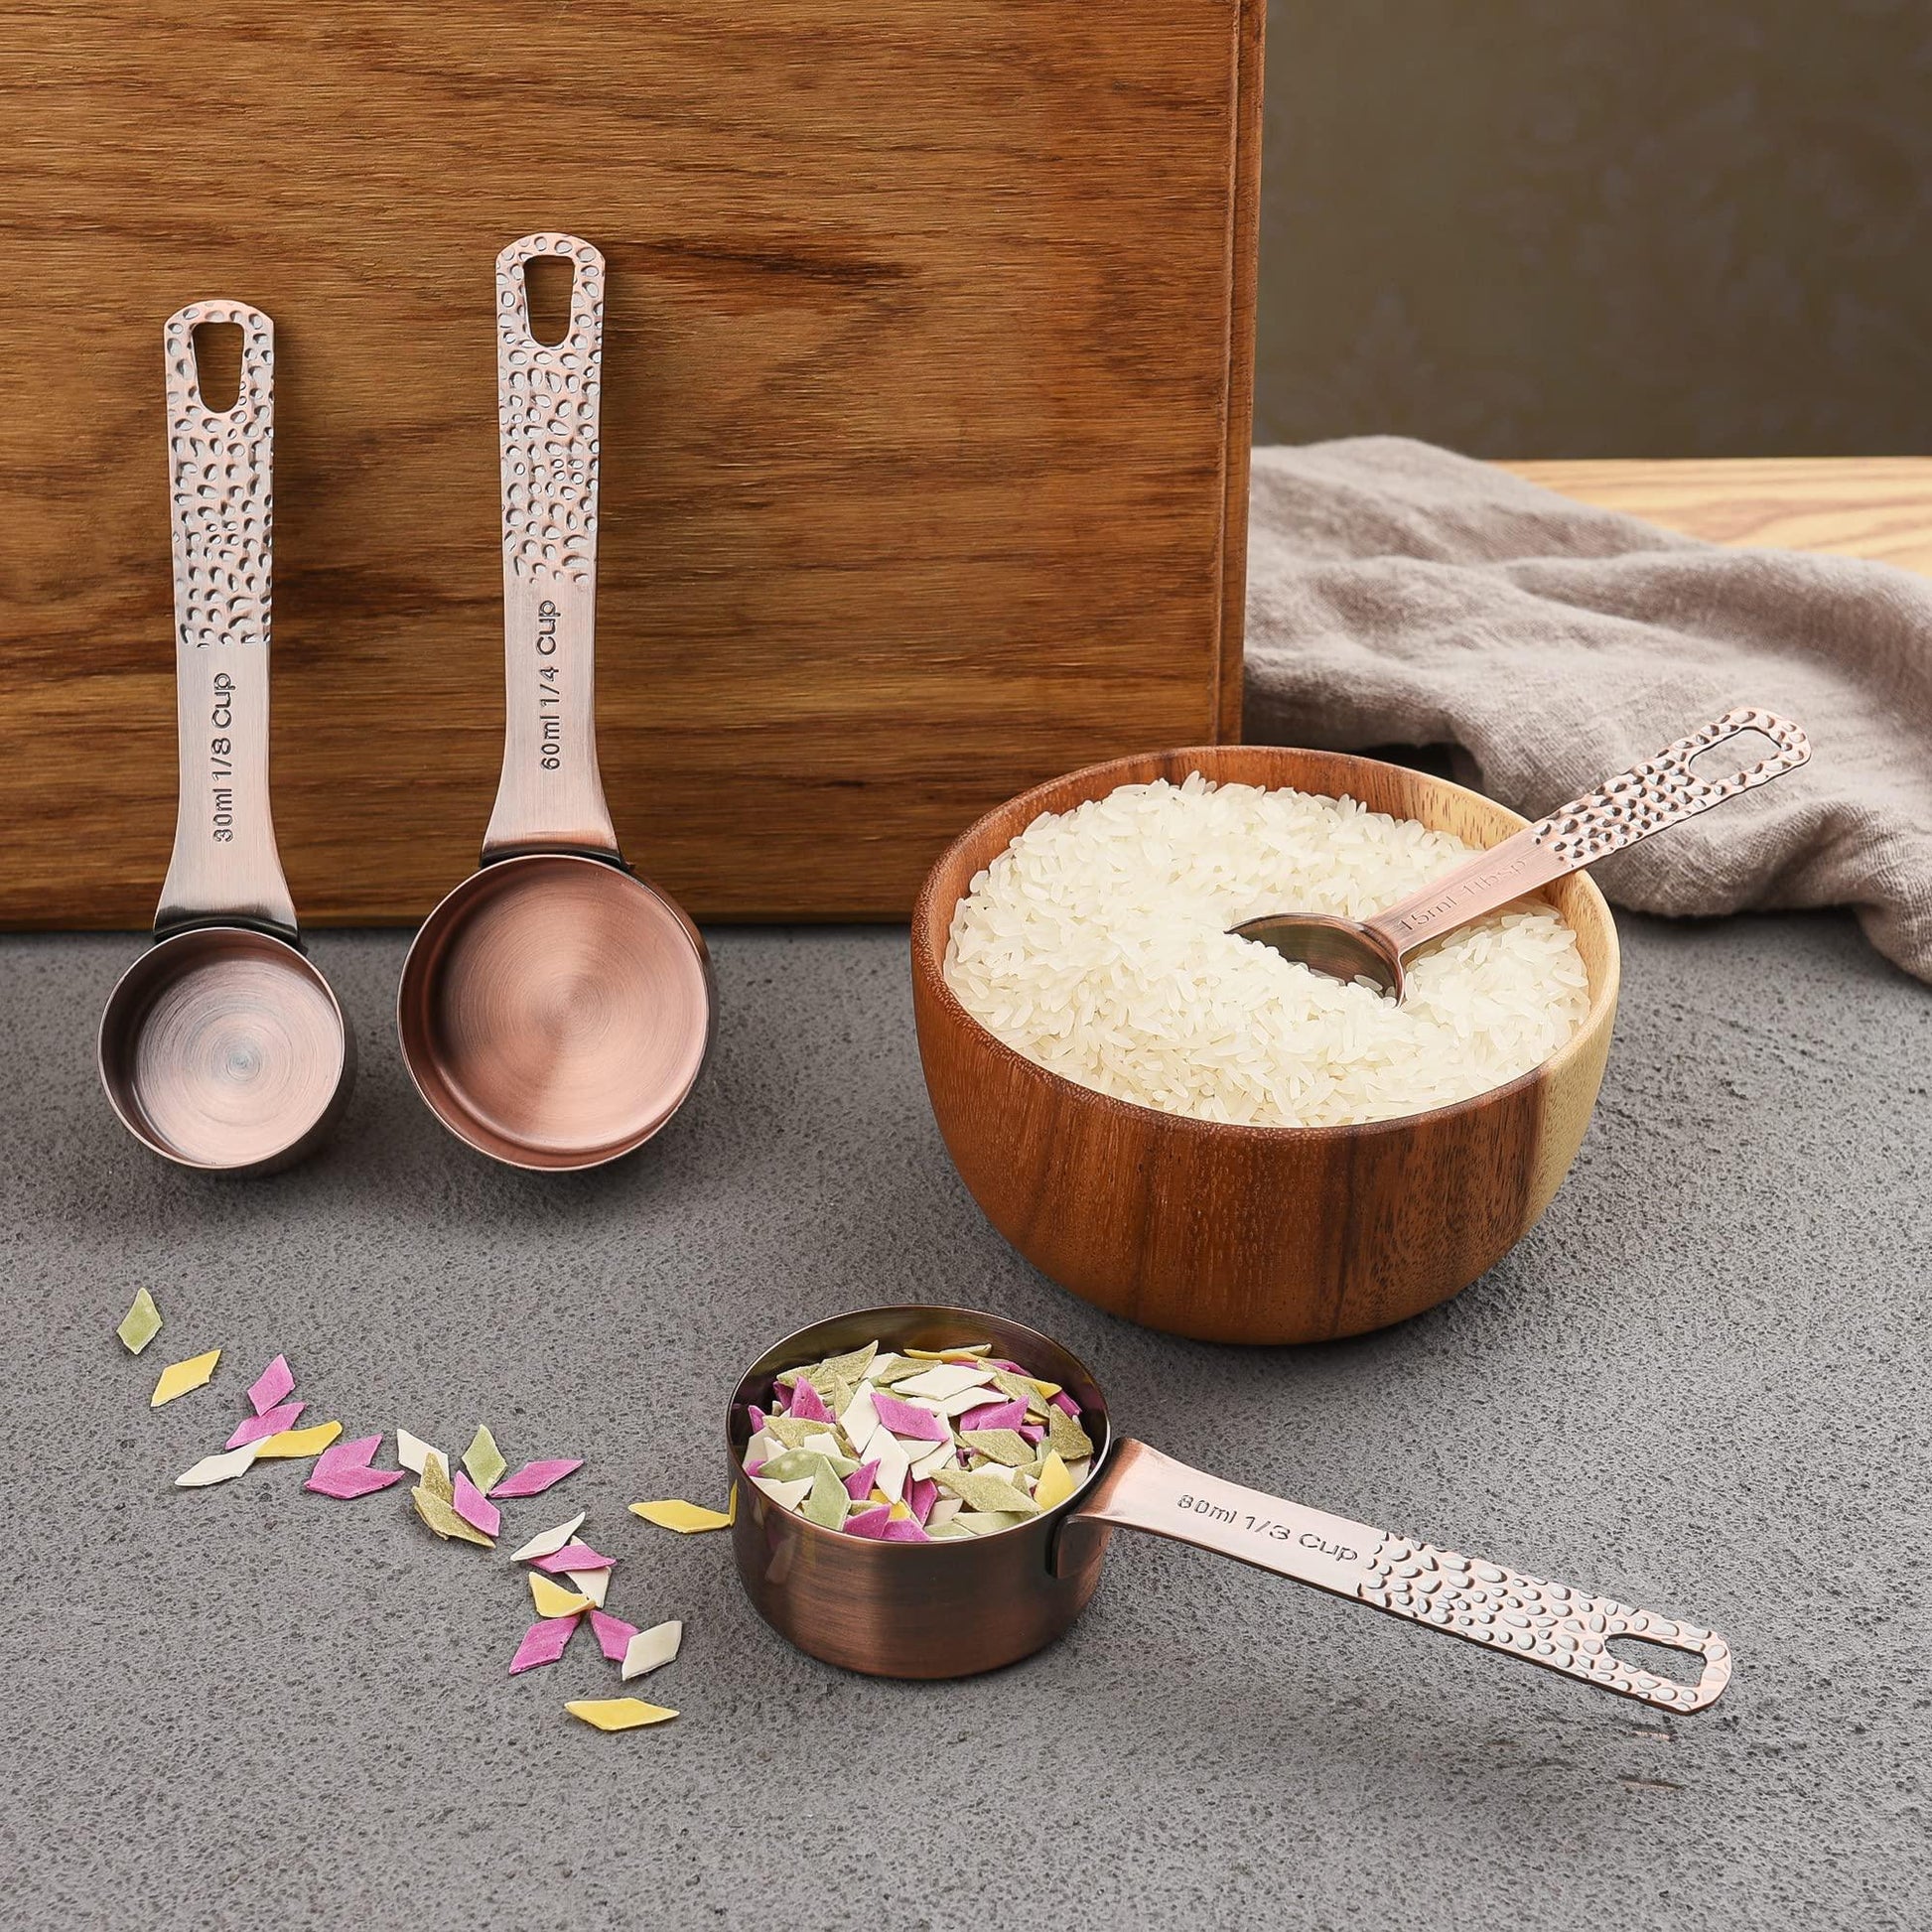 Measuring Cups and Spoons, Copper Measuring Cups and Spoons set, Stainless Steel Copper Plated 14 Piece Set of 5 Copper Measuring Cups and 6 Copper Measuring Spoons,1Leveler and 2Rings, Kitchen Tool - CookCave